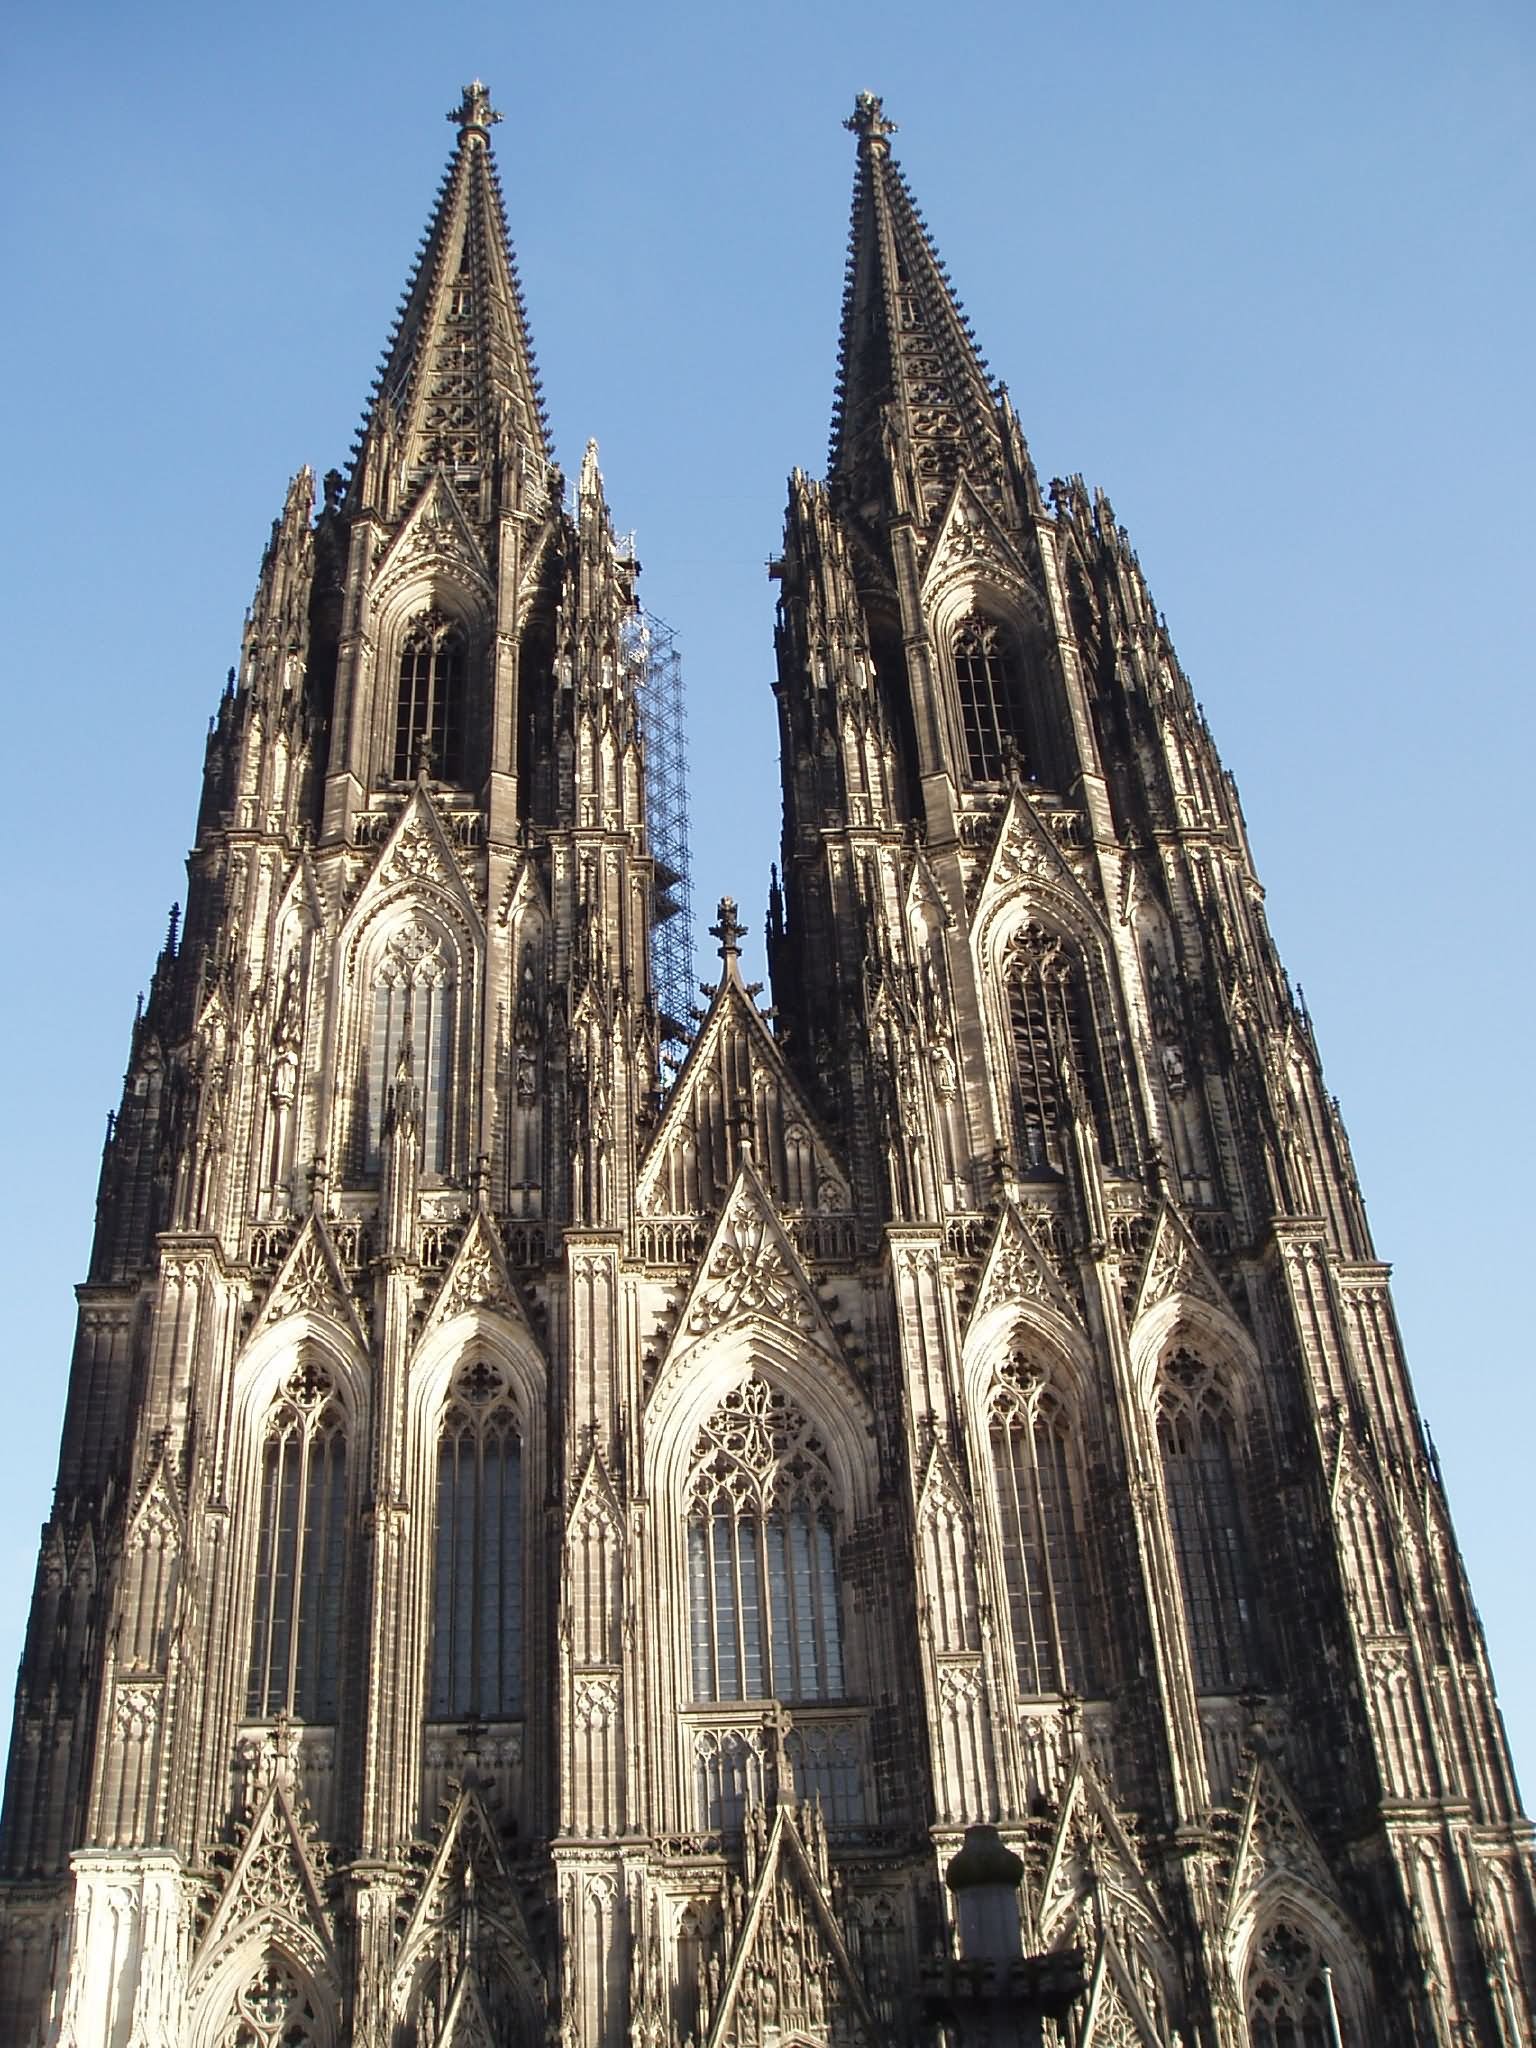 The West Front Of The Cologne Cathedral In Cologne, Germany